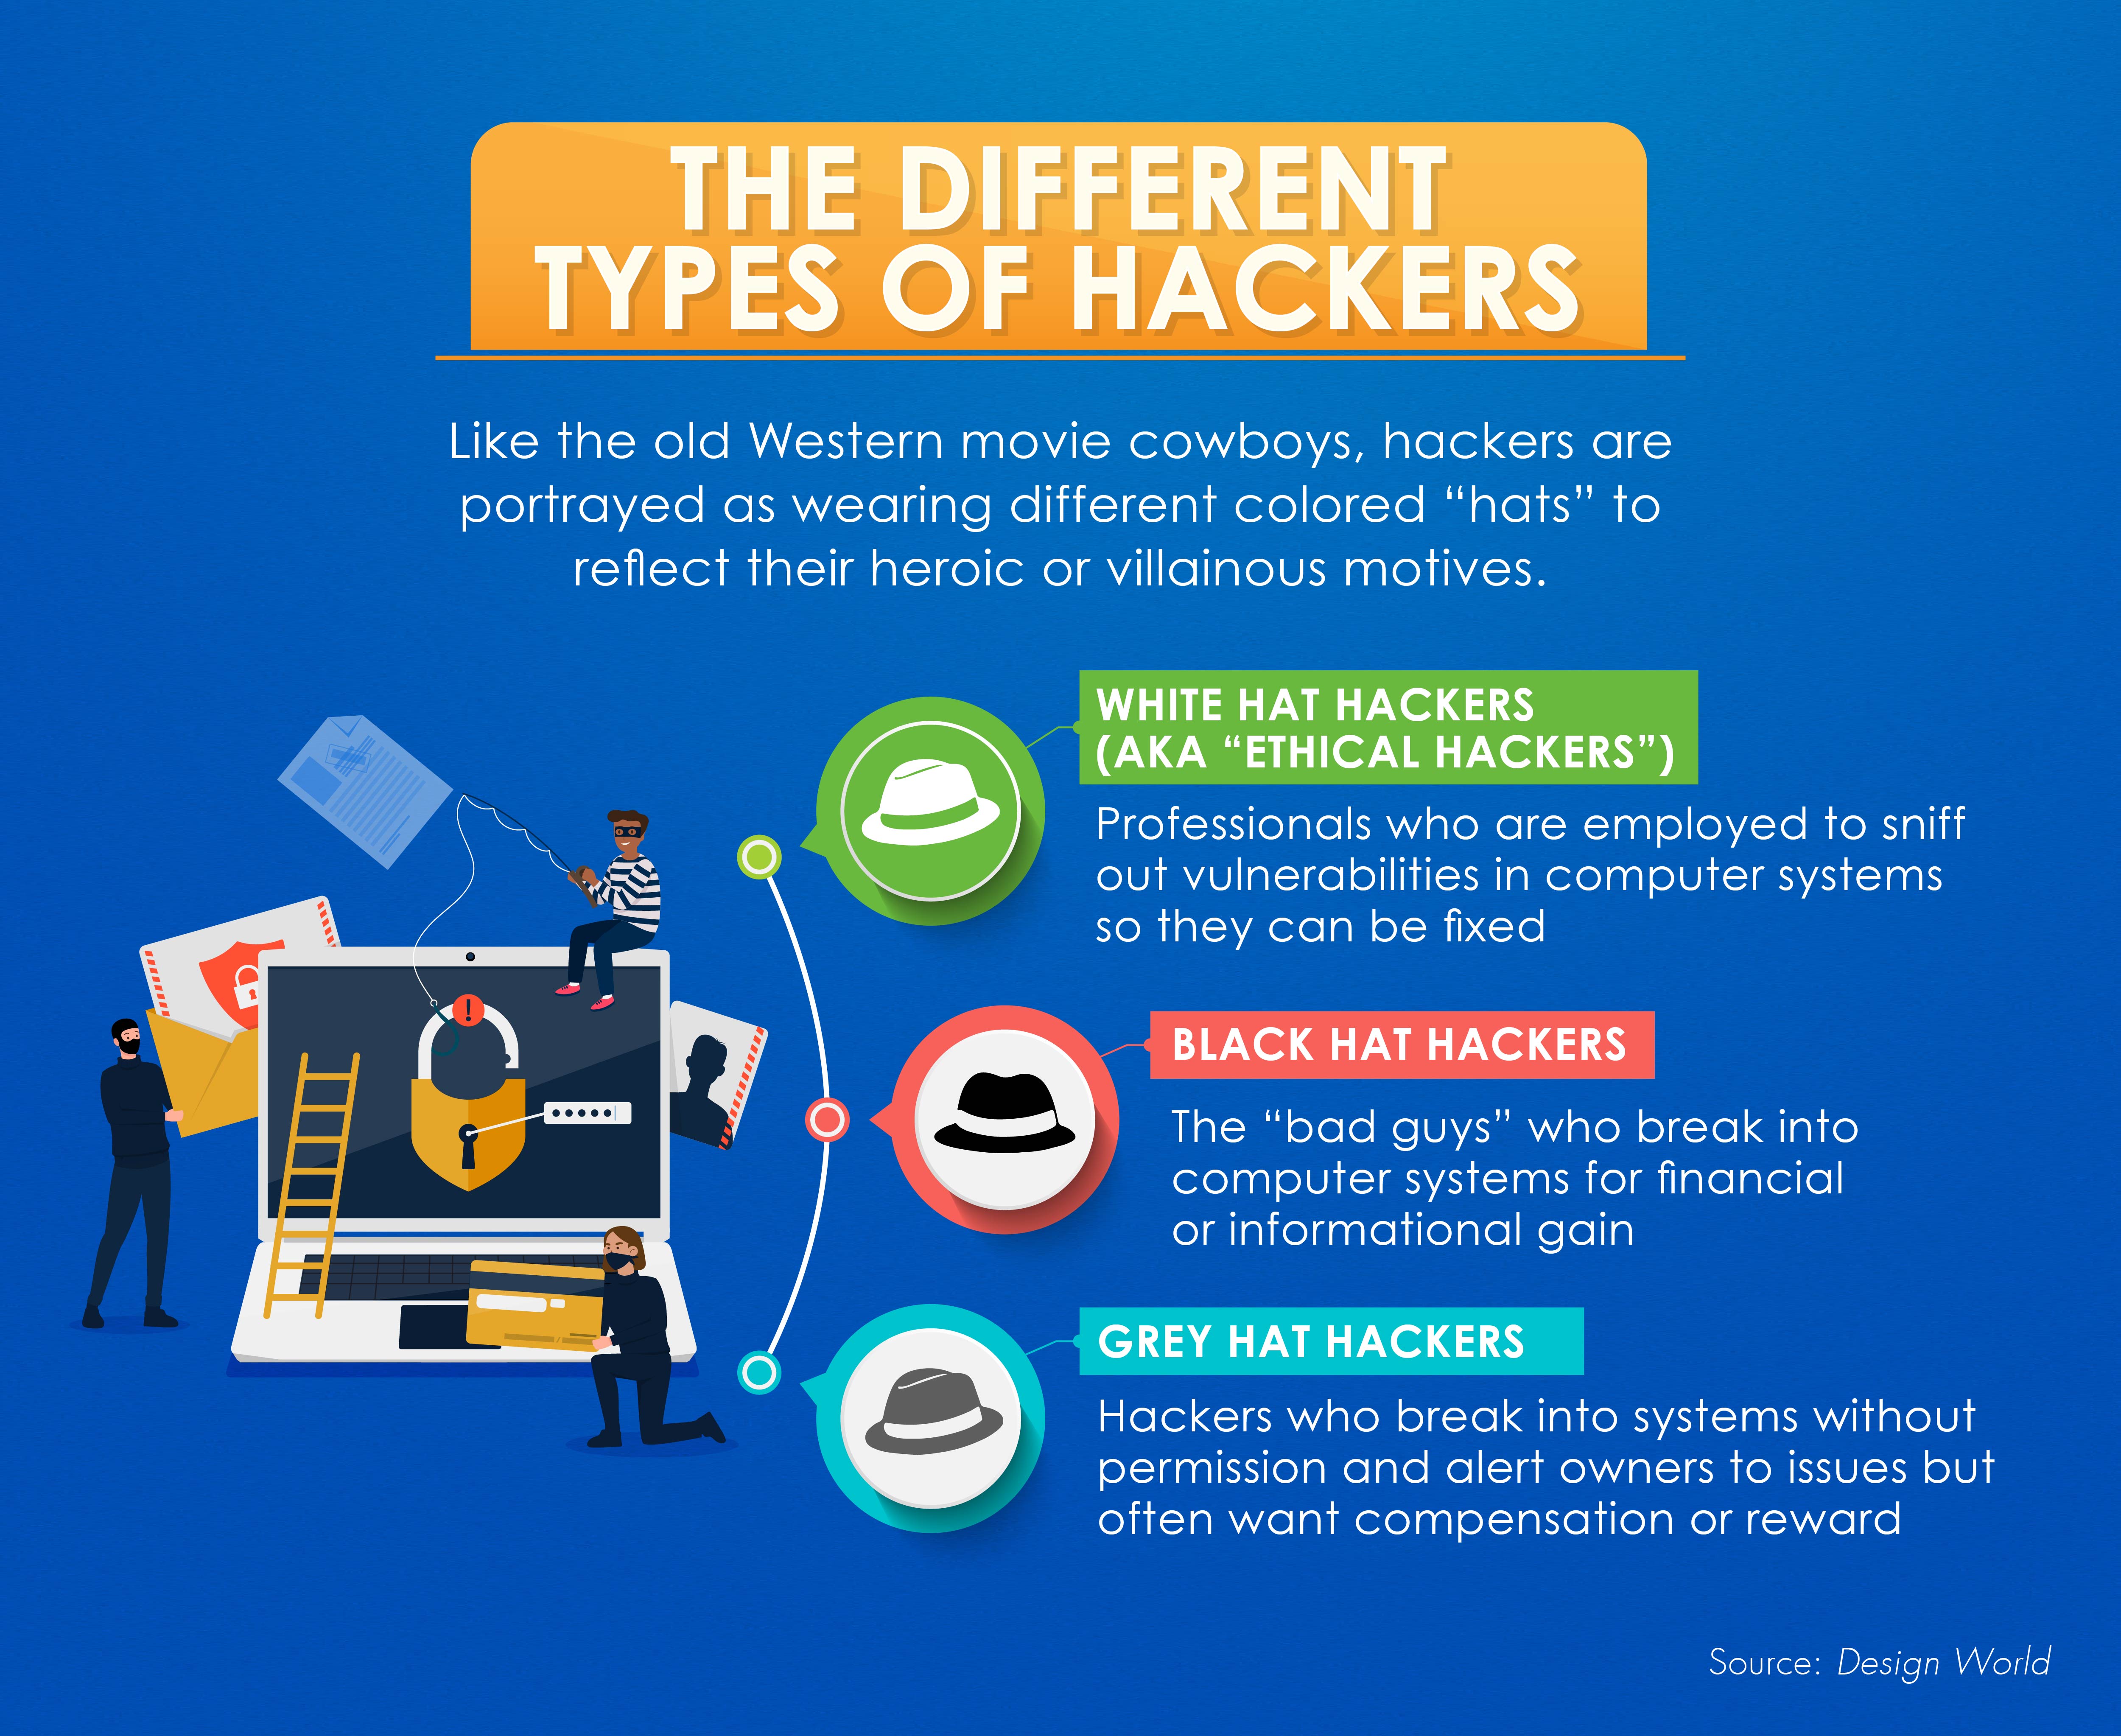 What Is Hacking? Types of Hacking & More